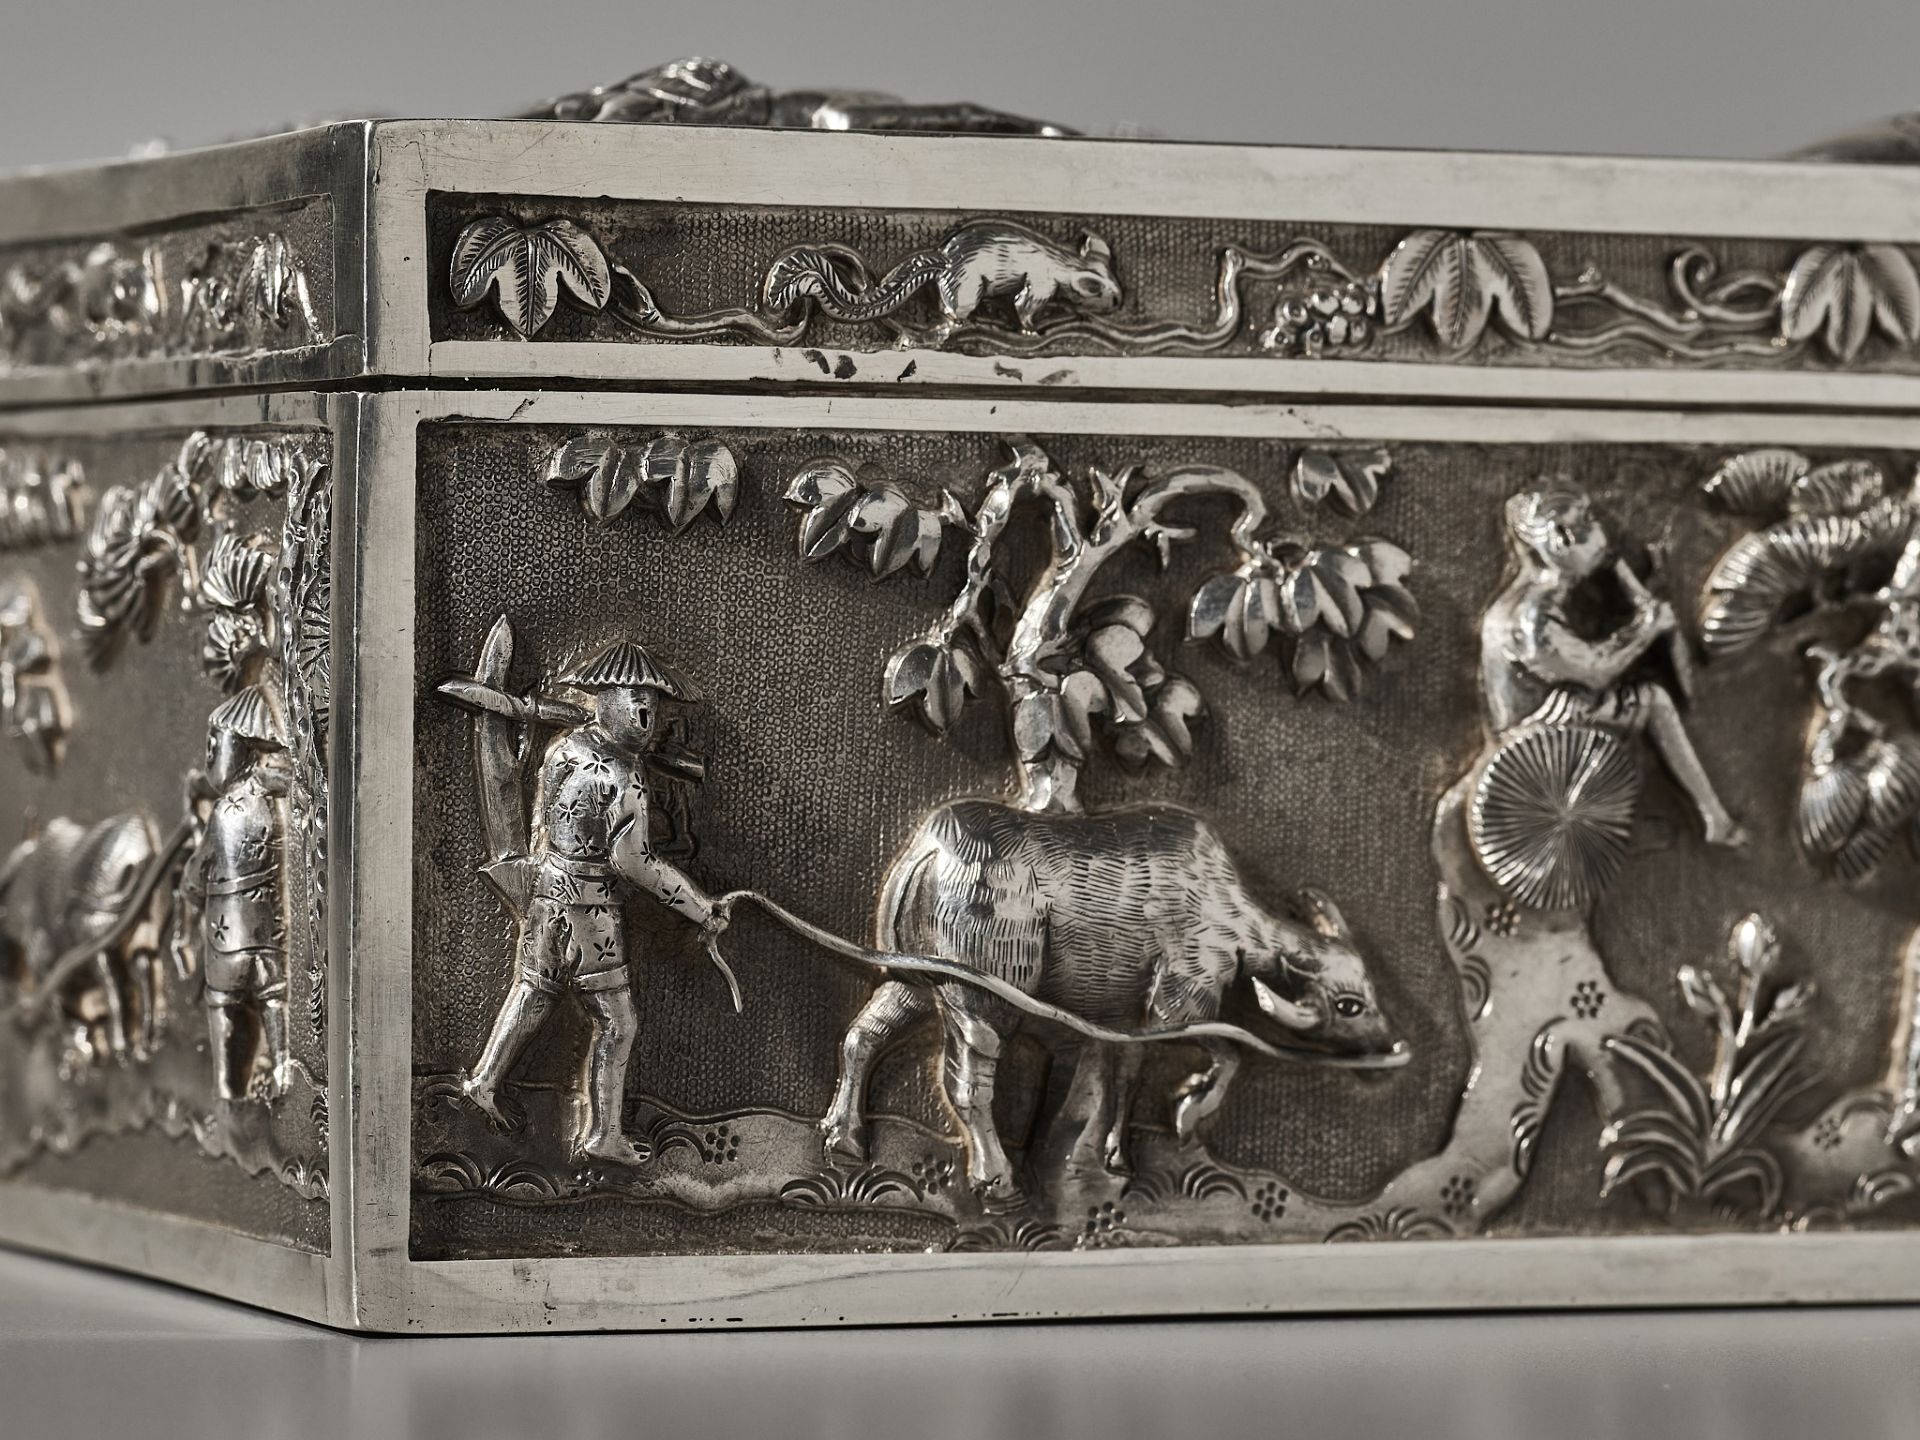 AN EXPORT SILVER REPOUSSE CIGAR BOX AND COVER, TONG YI MARK, LATE QING DYNASTY - Image 21 of 22